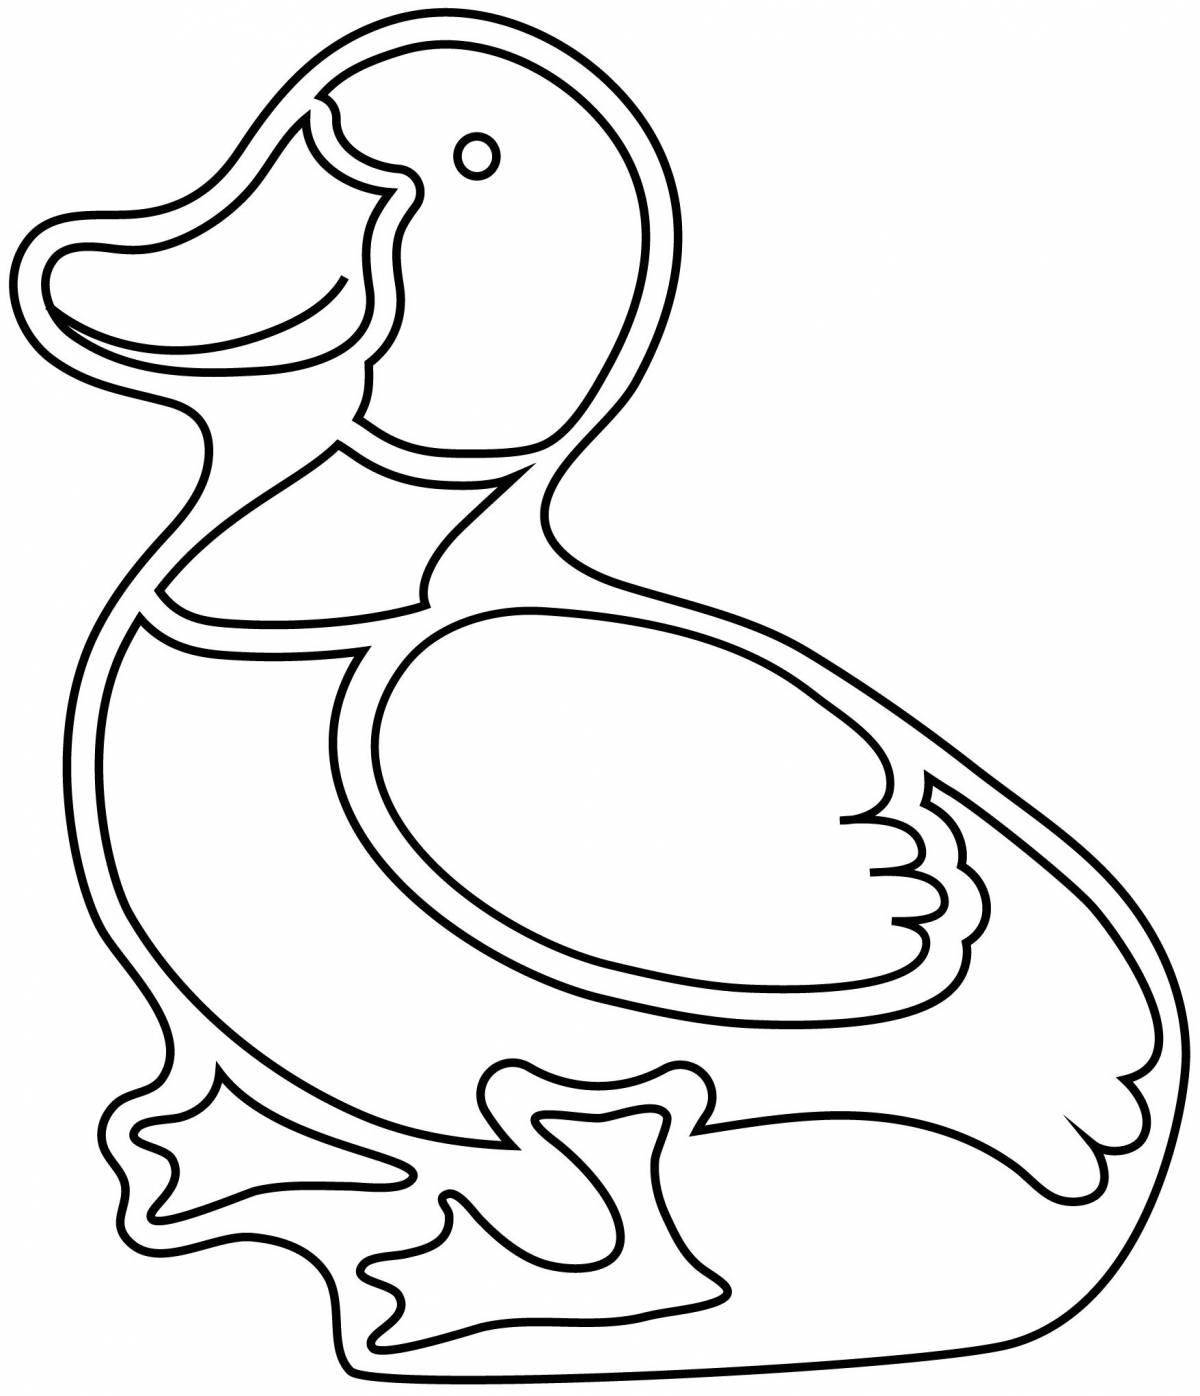 Fantastic duck coloring book for kids